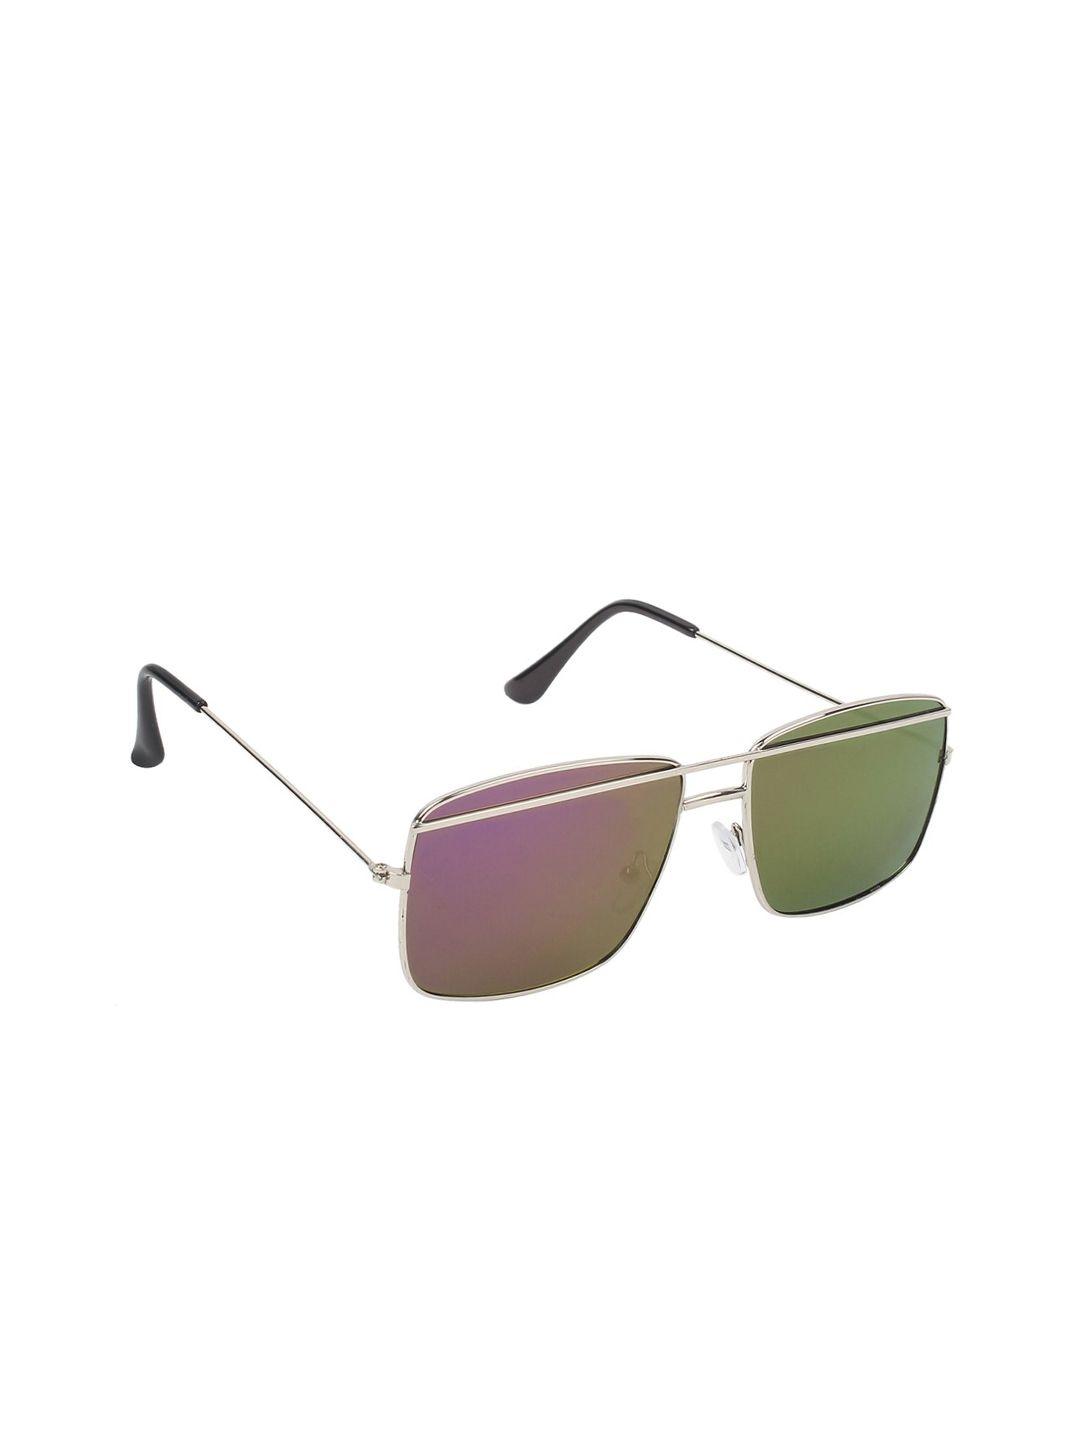 swiss design unisex purple lens & silver-toned square sunglasses with uv protected lens